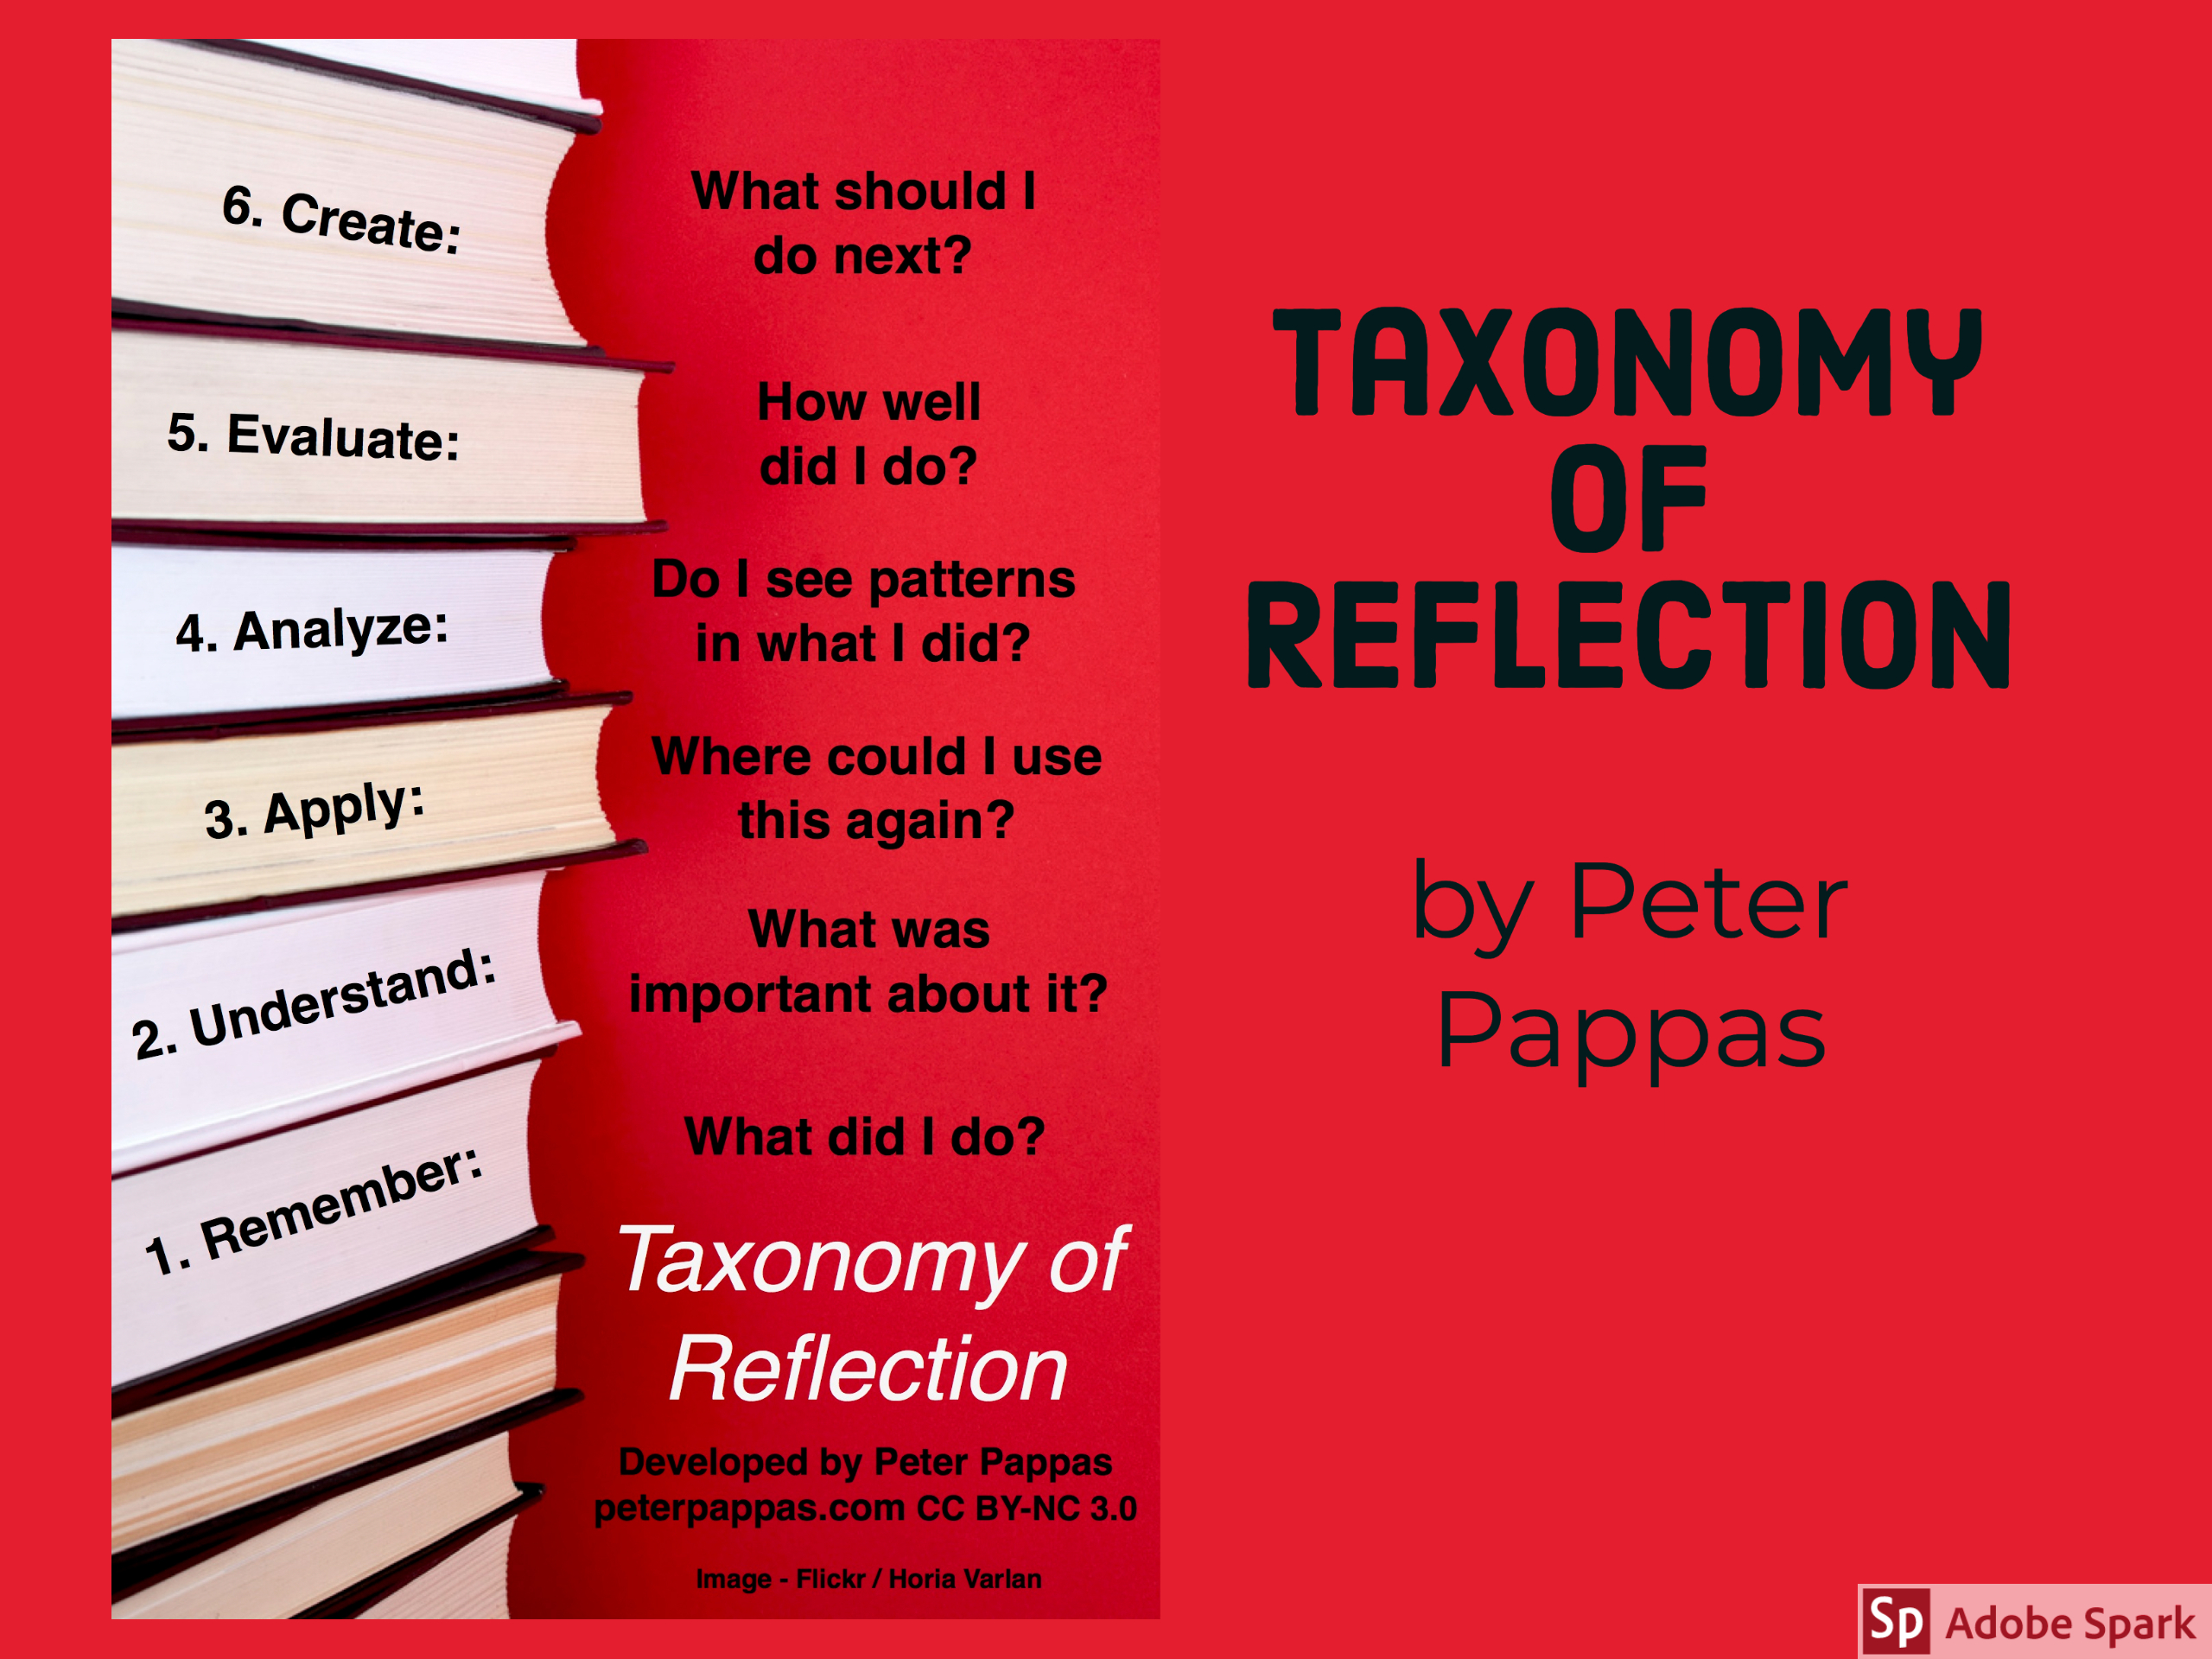 Taxonomy of Reflection by Peter Pappas